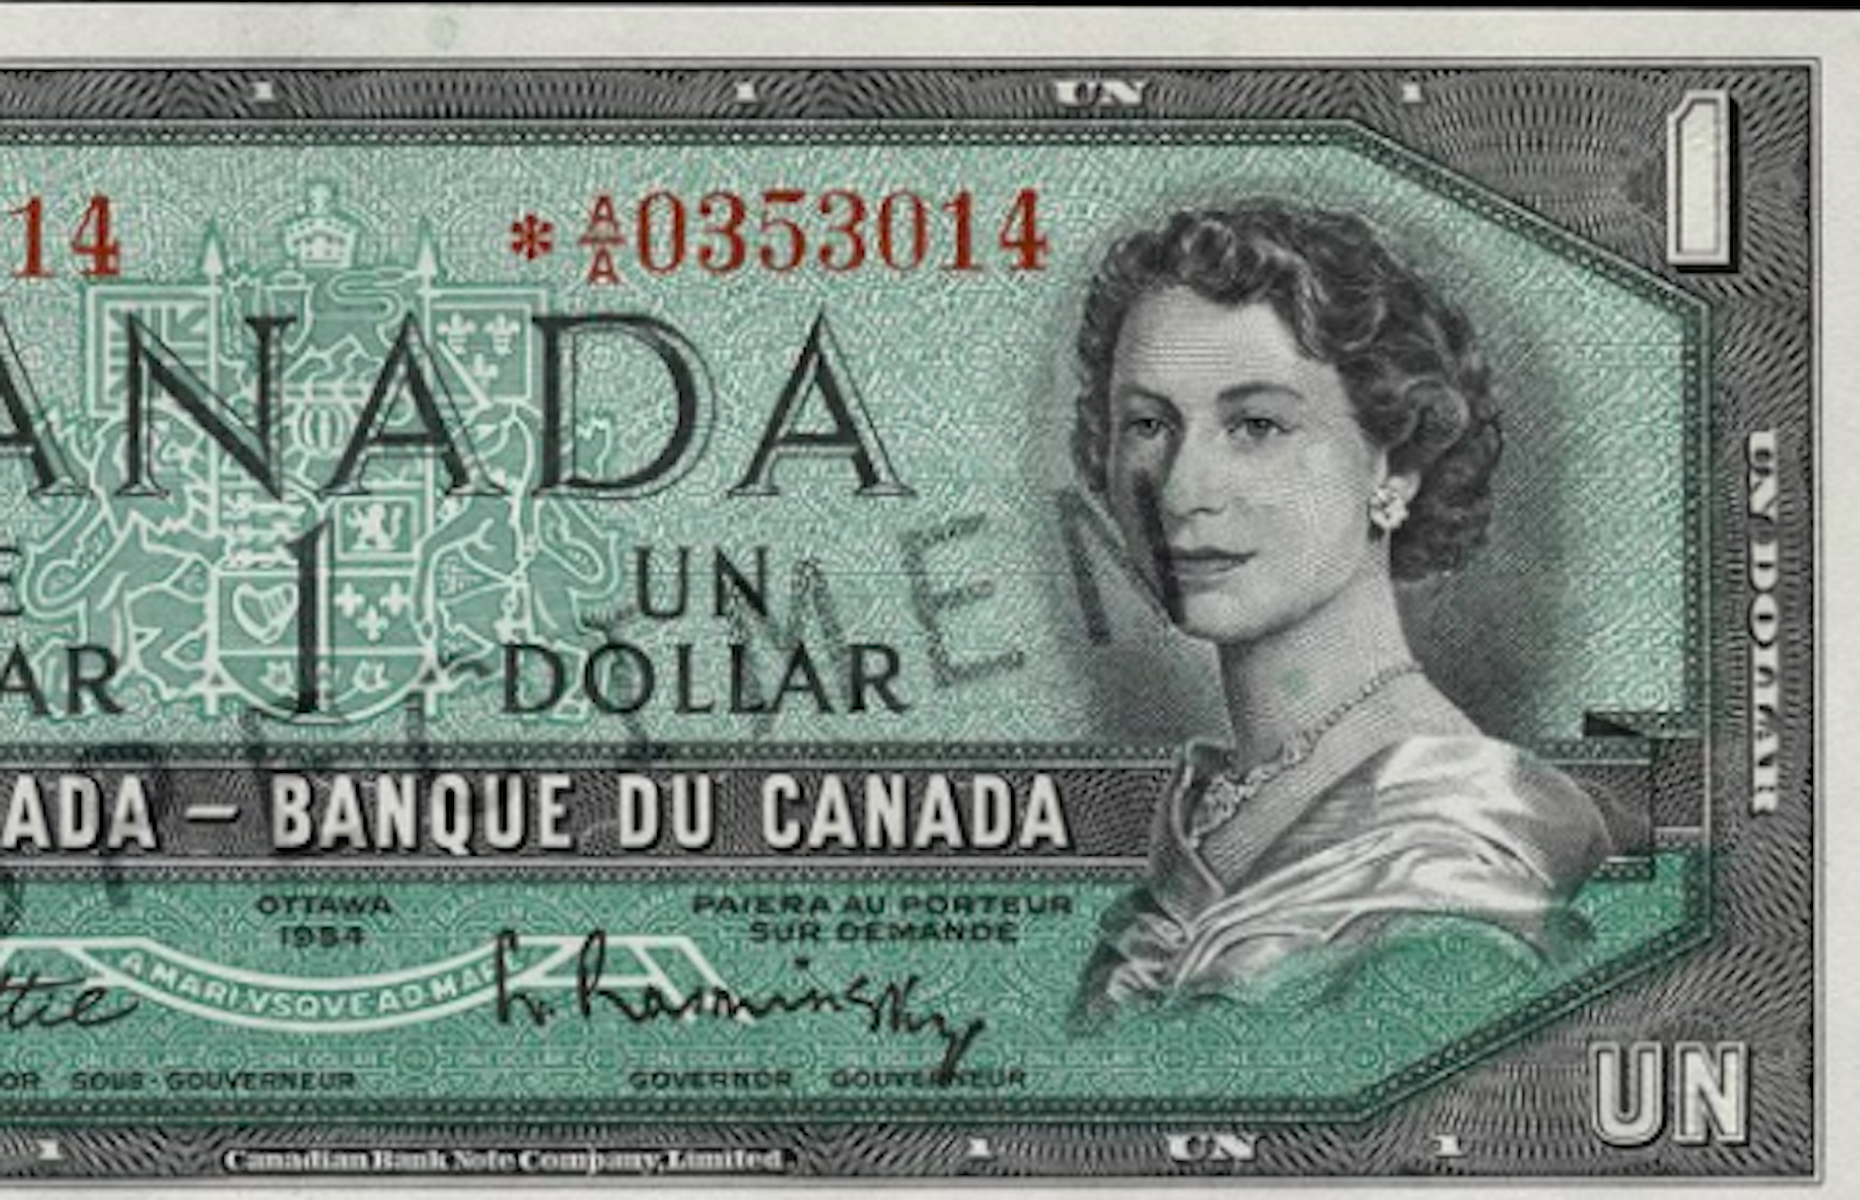 Canadian $1 note (1954)